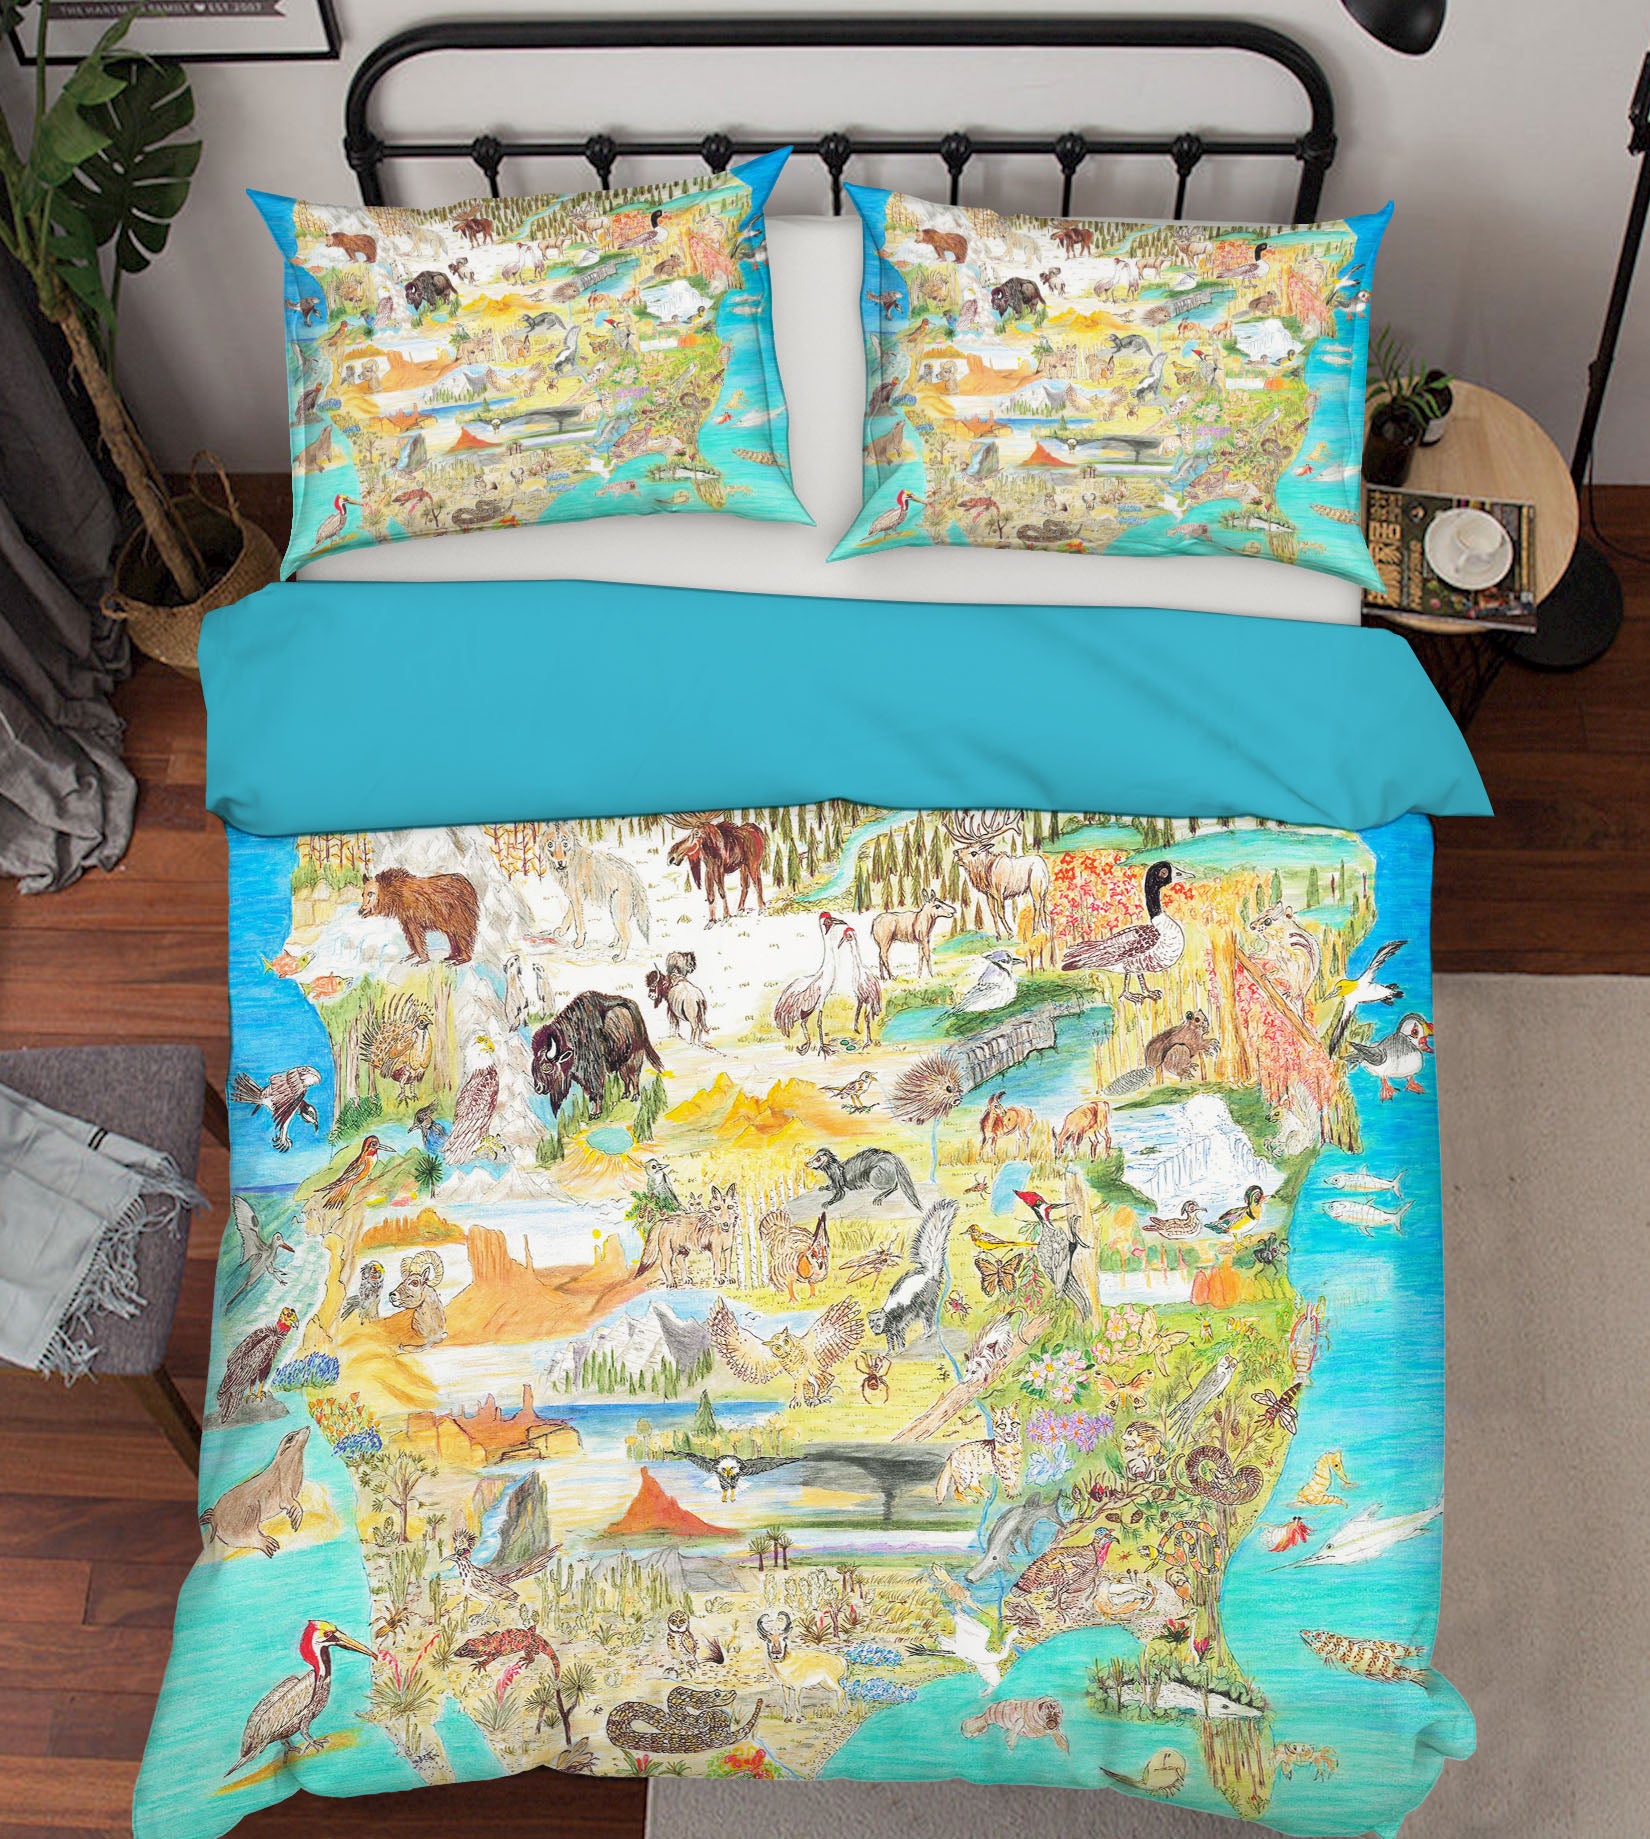 3D Animal Atlas 038 Michael Sewell Bedding Bed Pillowcases Quilt